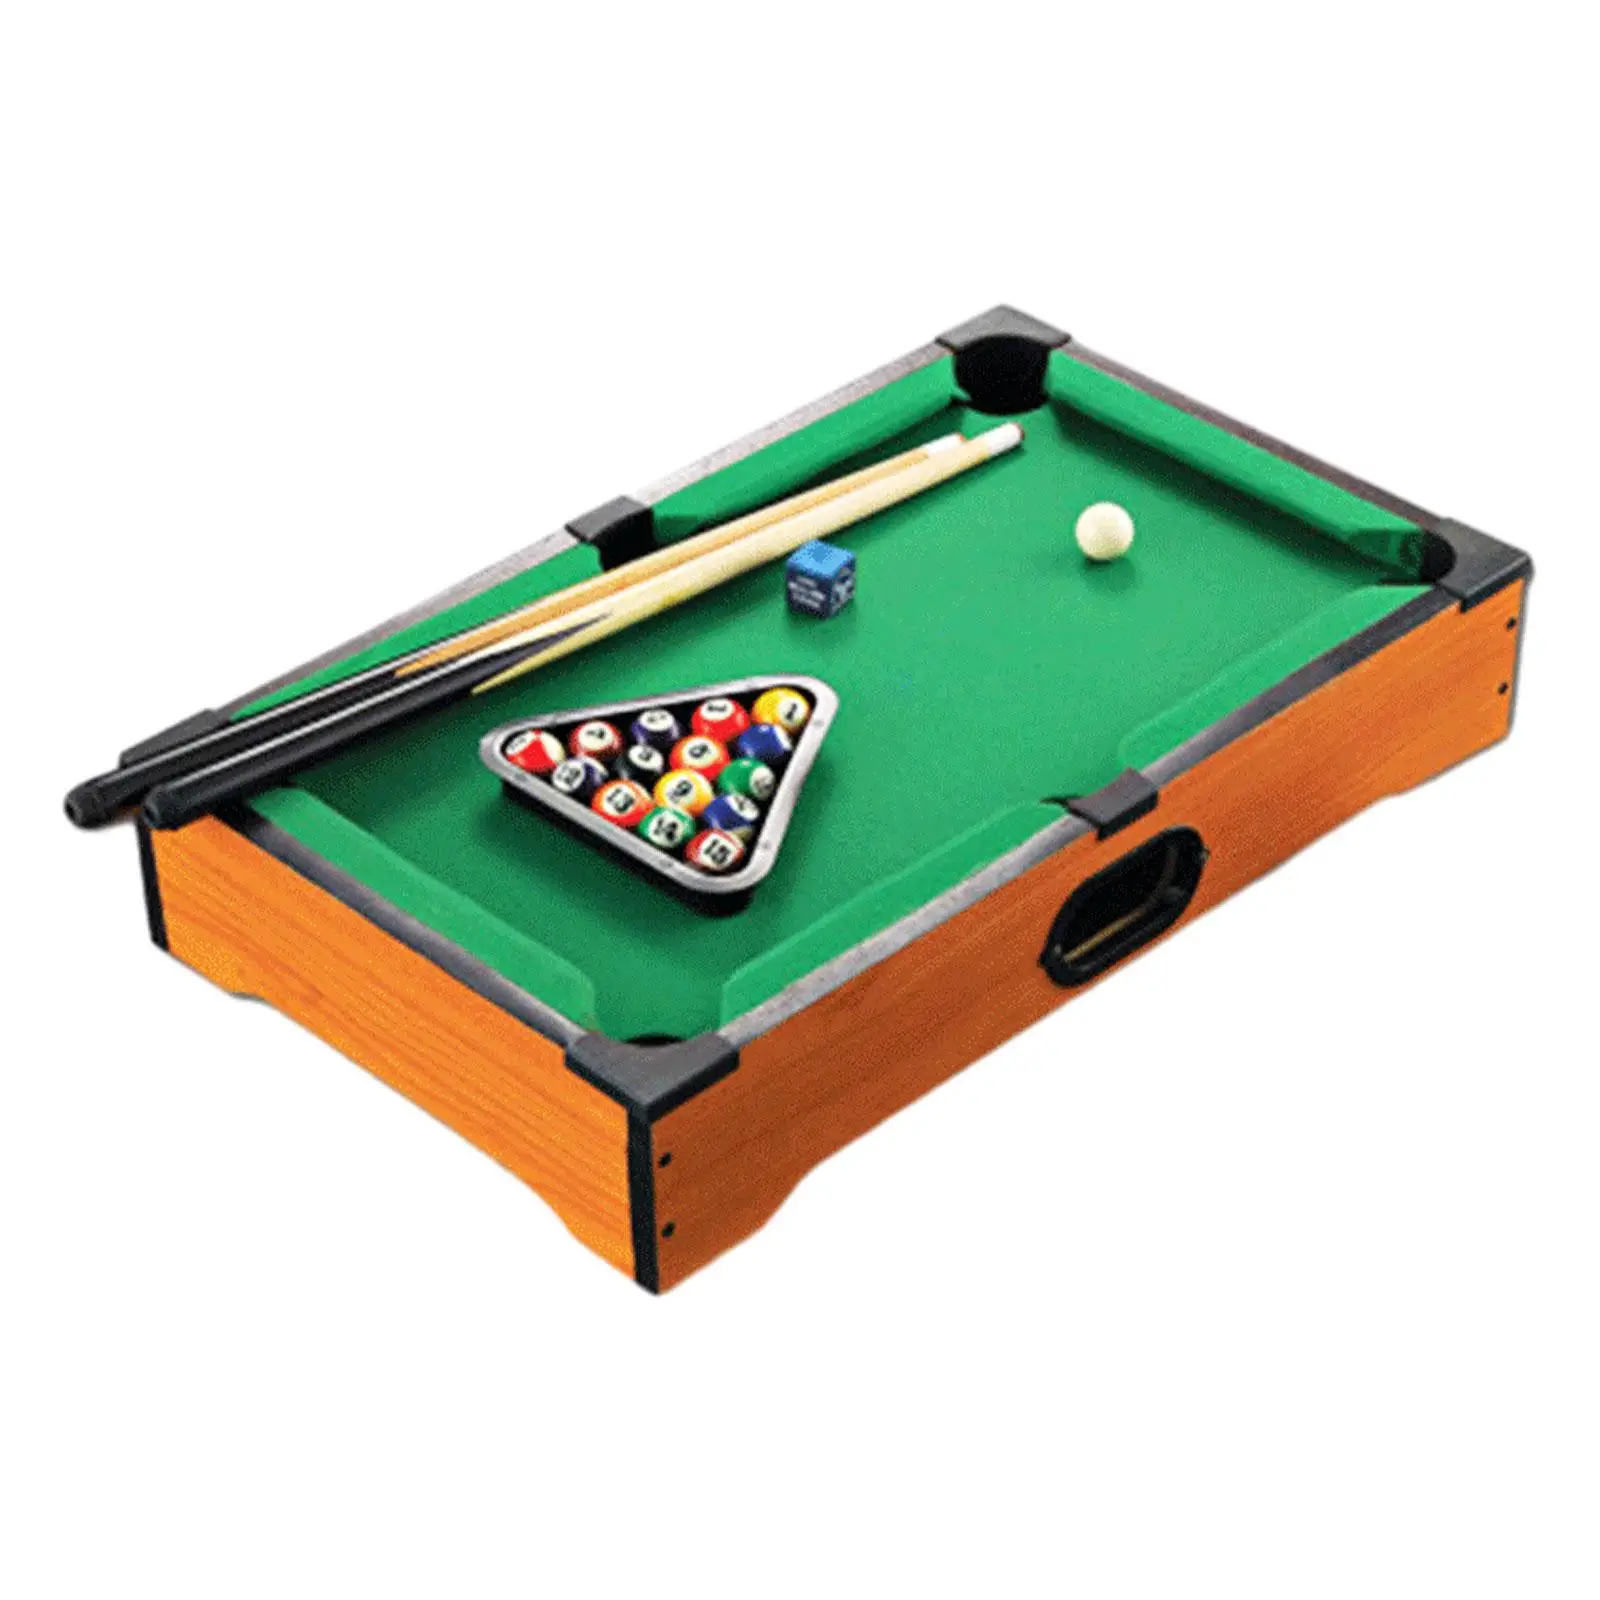 Mini Table Pool Eye Hand Coordination Portable Cues Billiards Playset Wooden for Living Room Office Indoor Desktop Playhouse